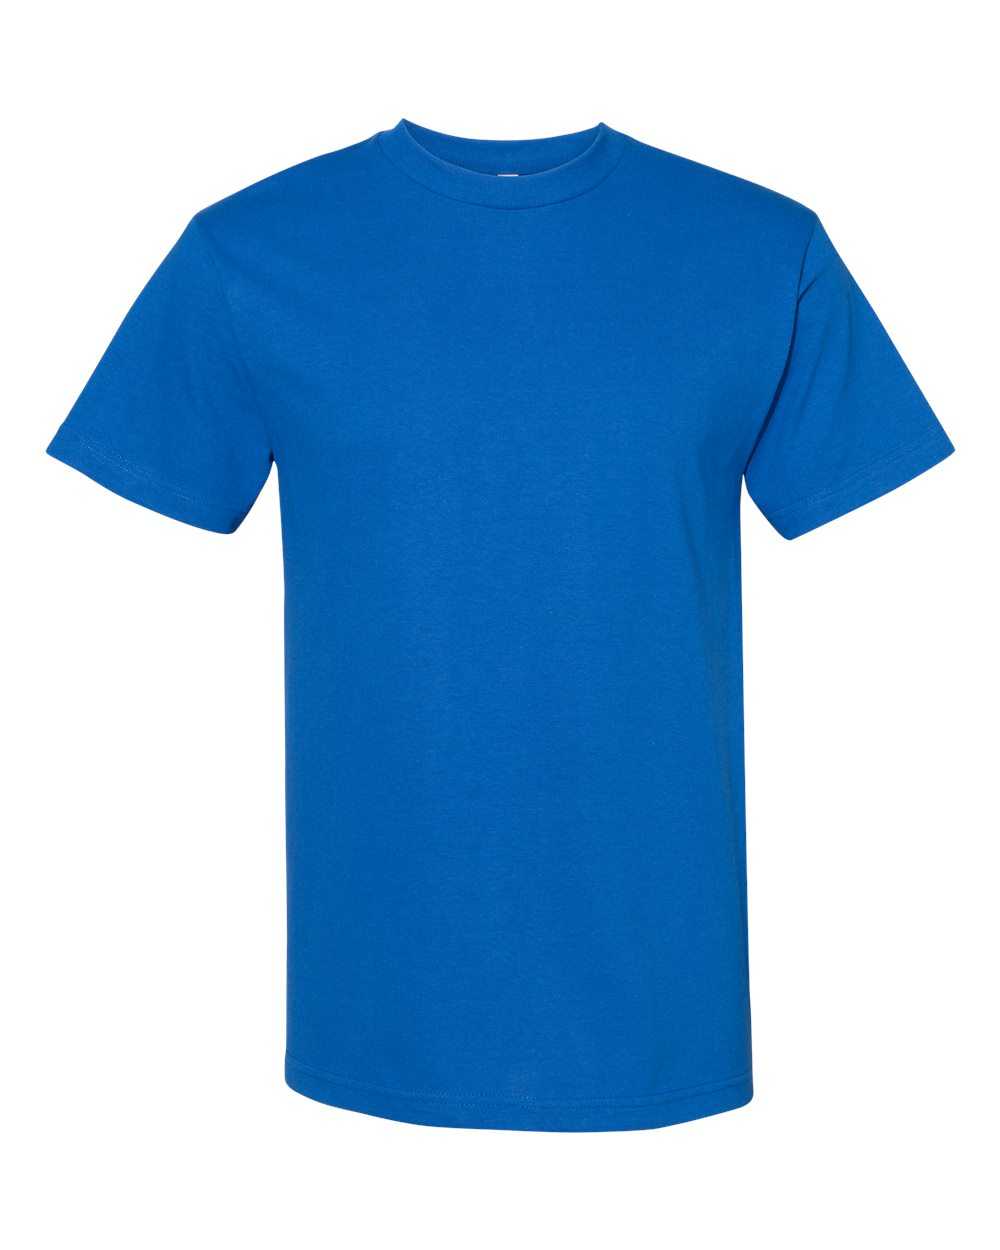 American Apparel 1301 Unisex Heavyweight Cotton T-Shirt - Royal - HIT a Double